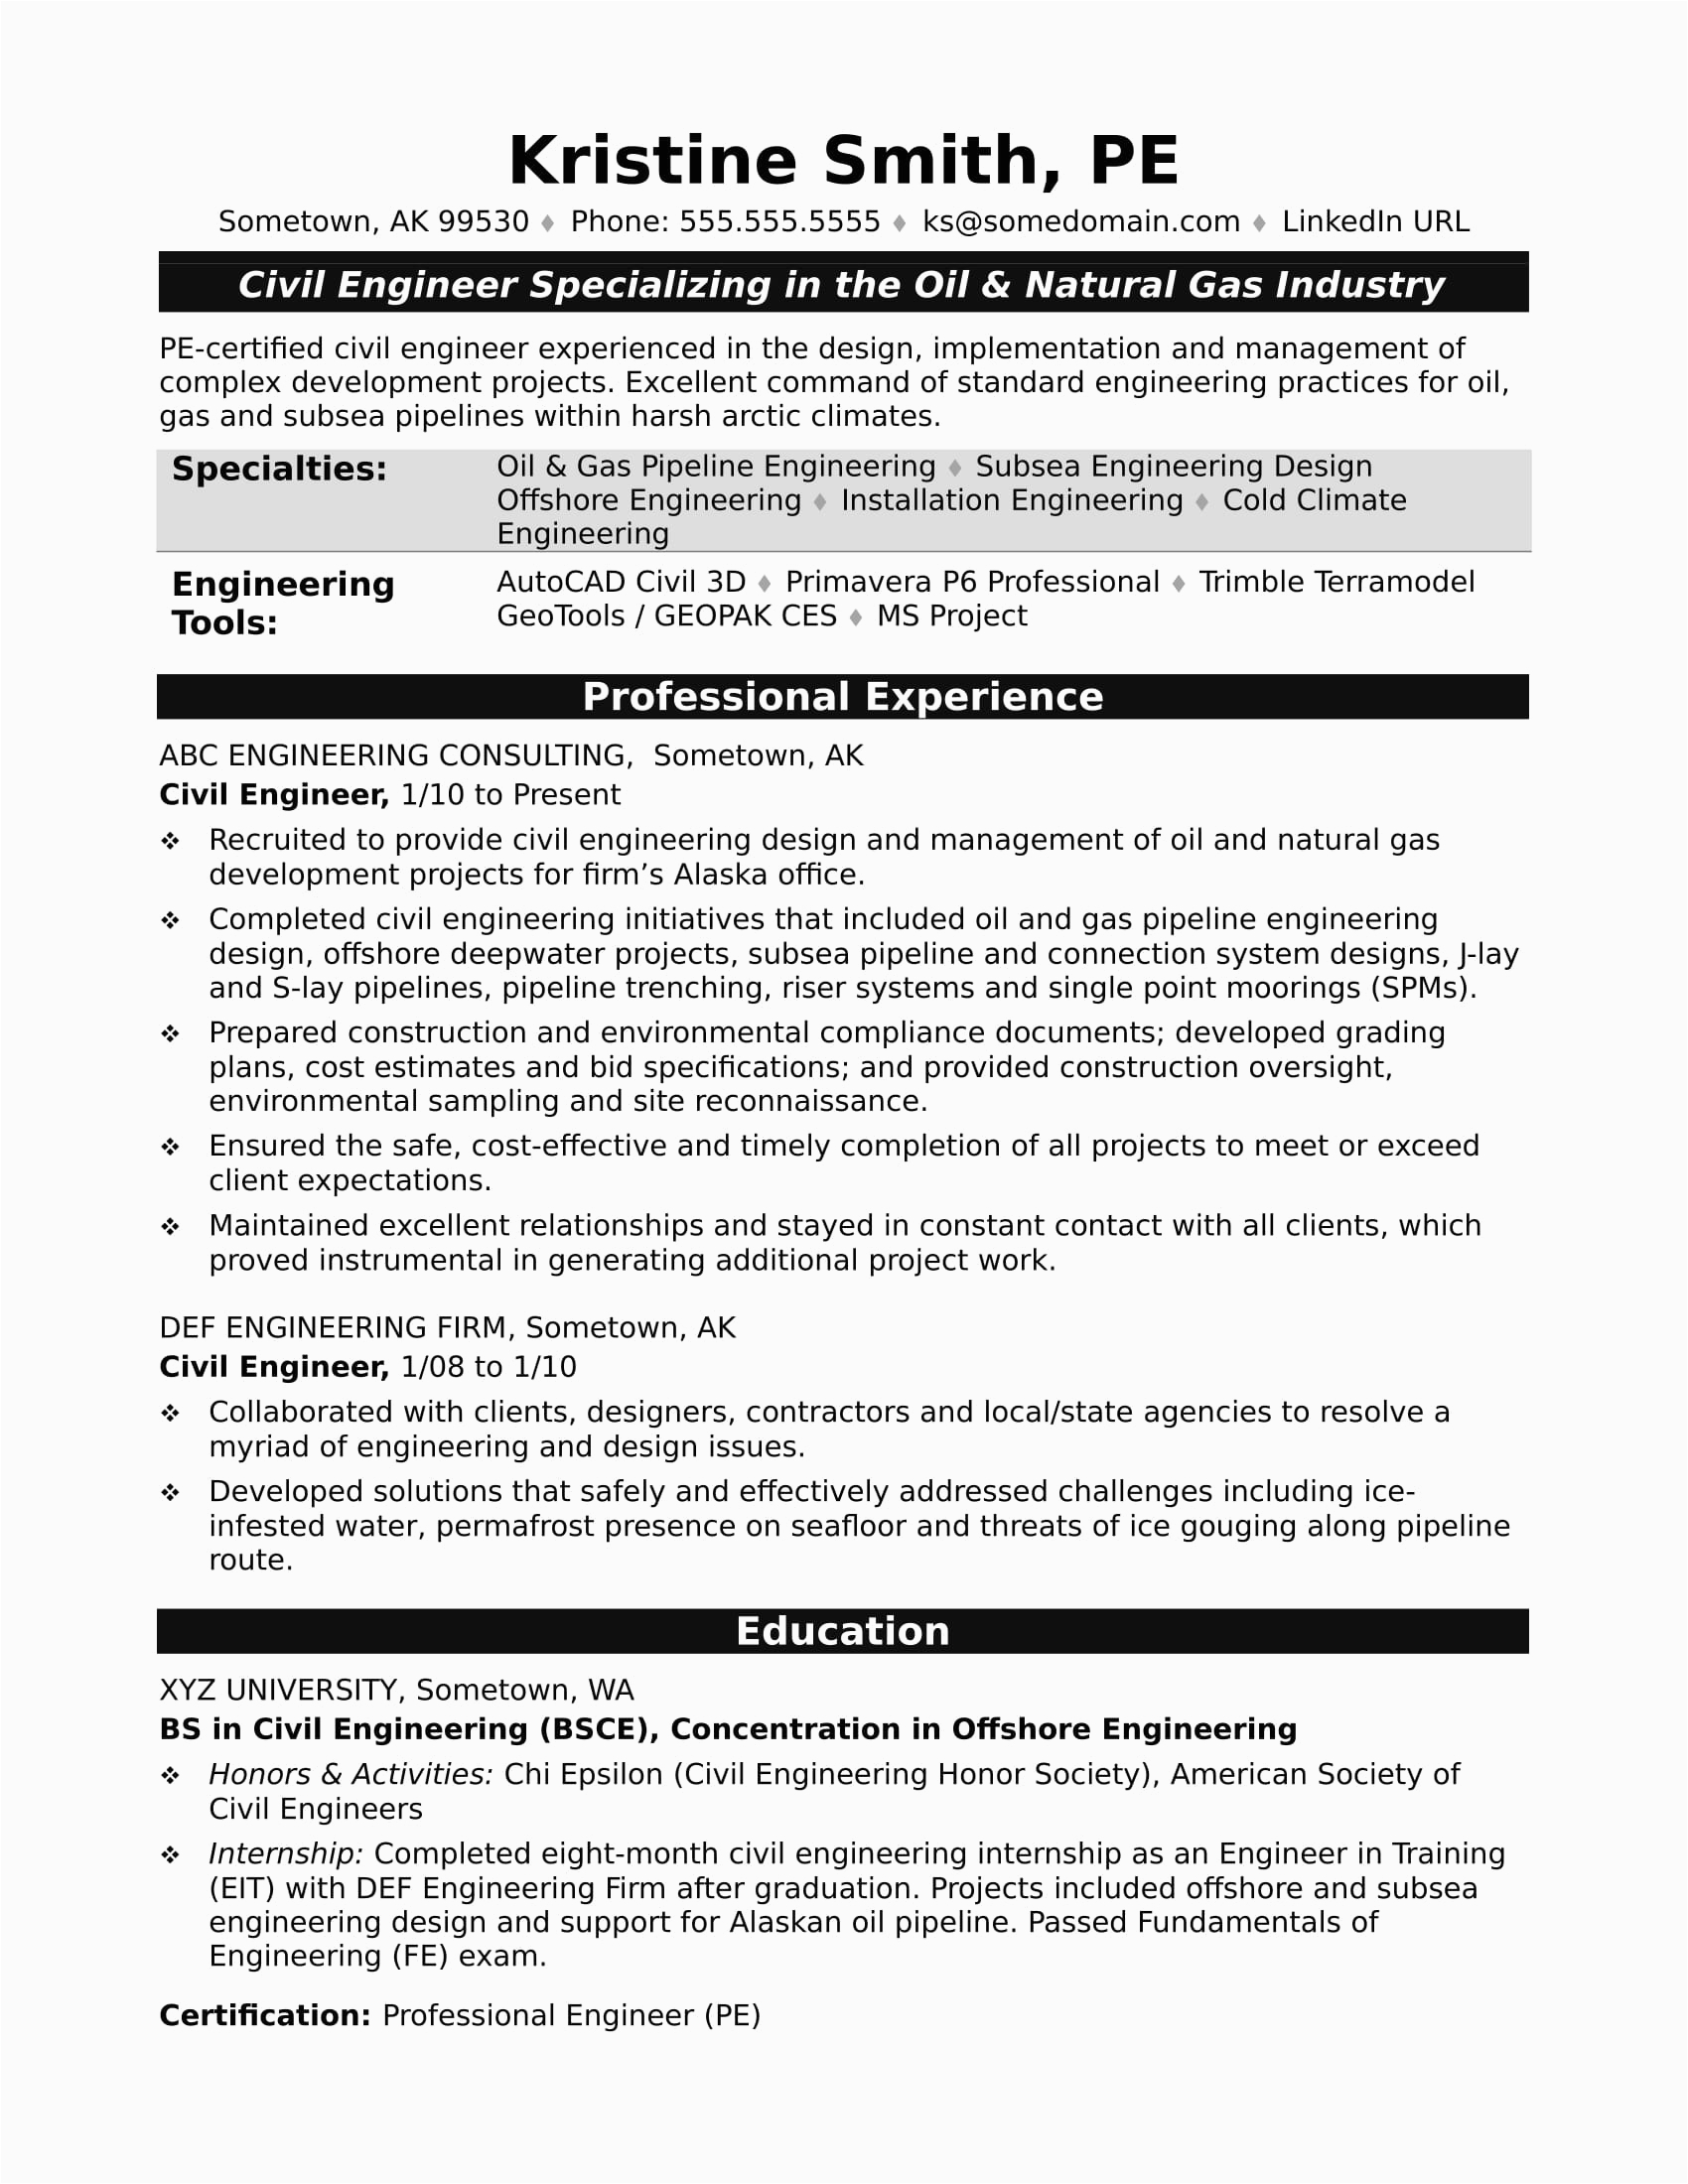 I Need to See A Sample Resume Sample Resume for A Midlevel Civil Engineer